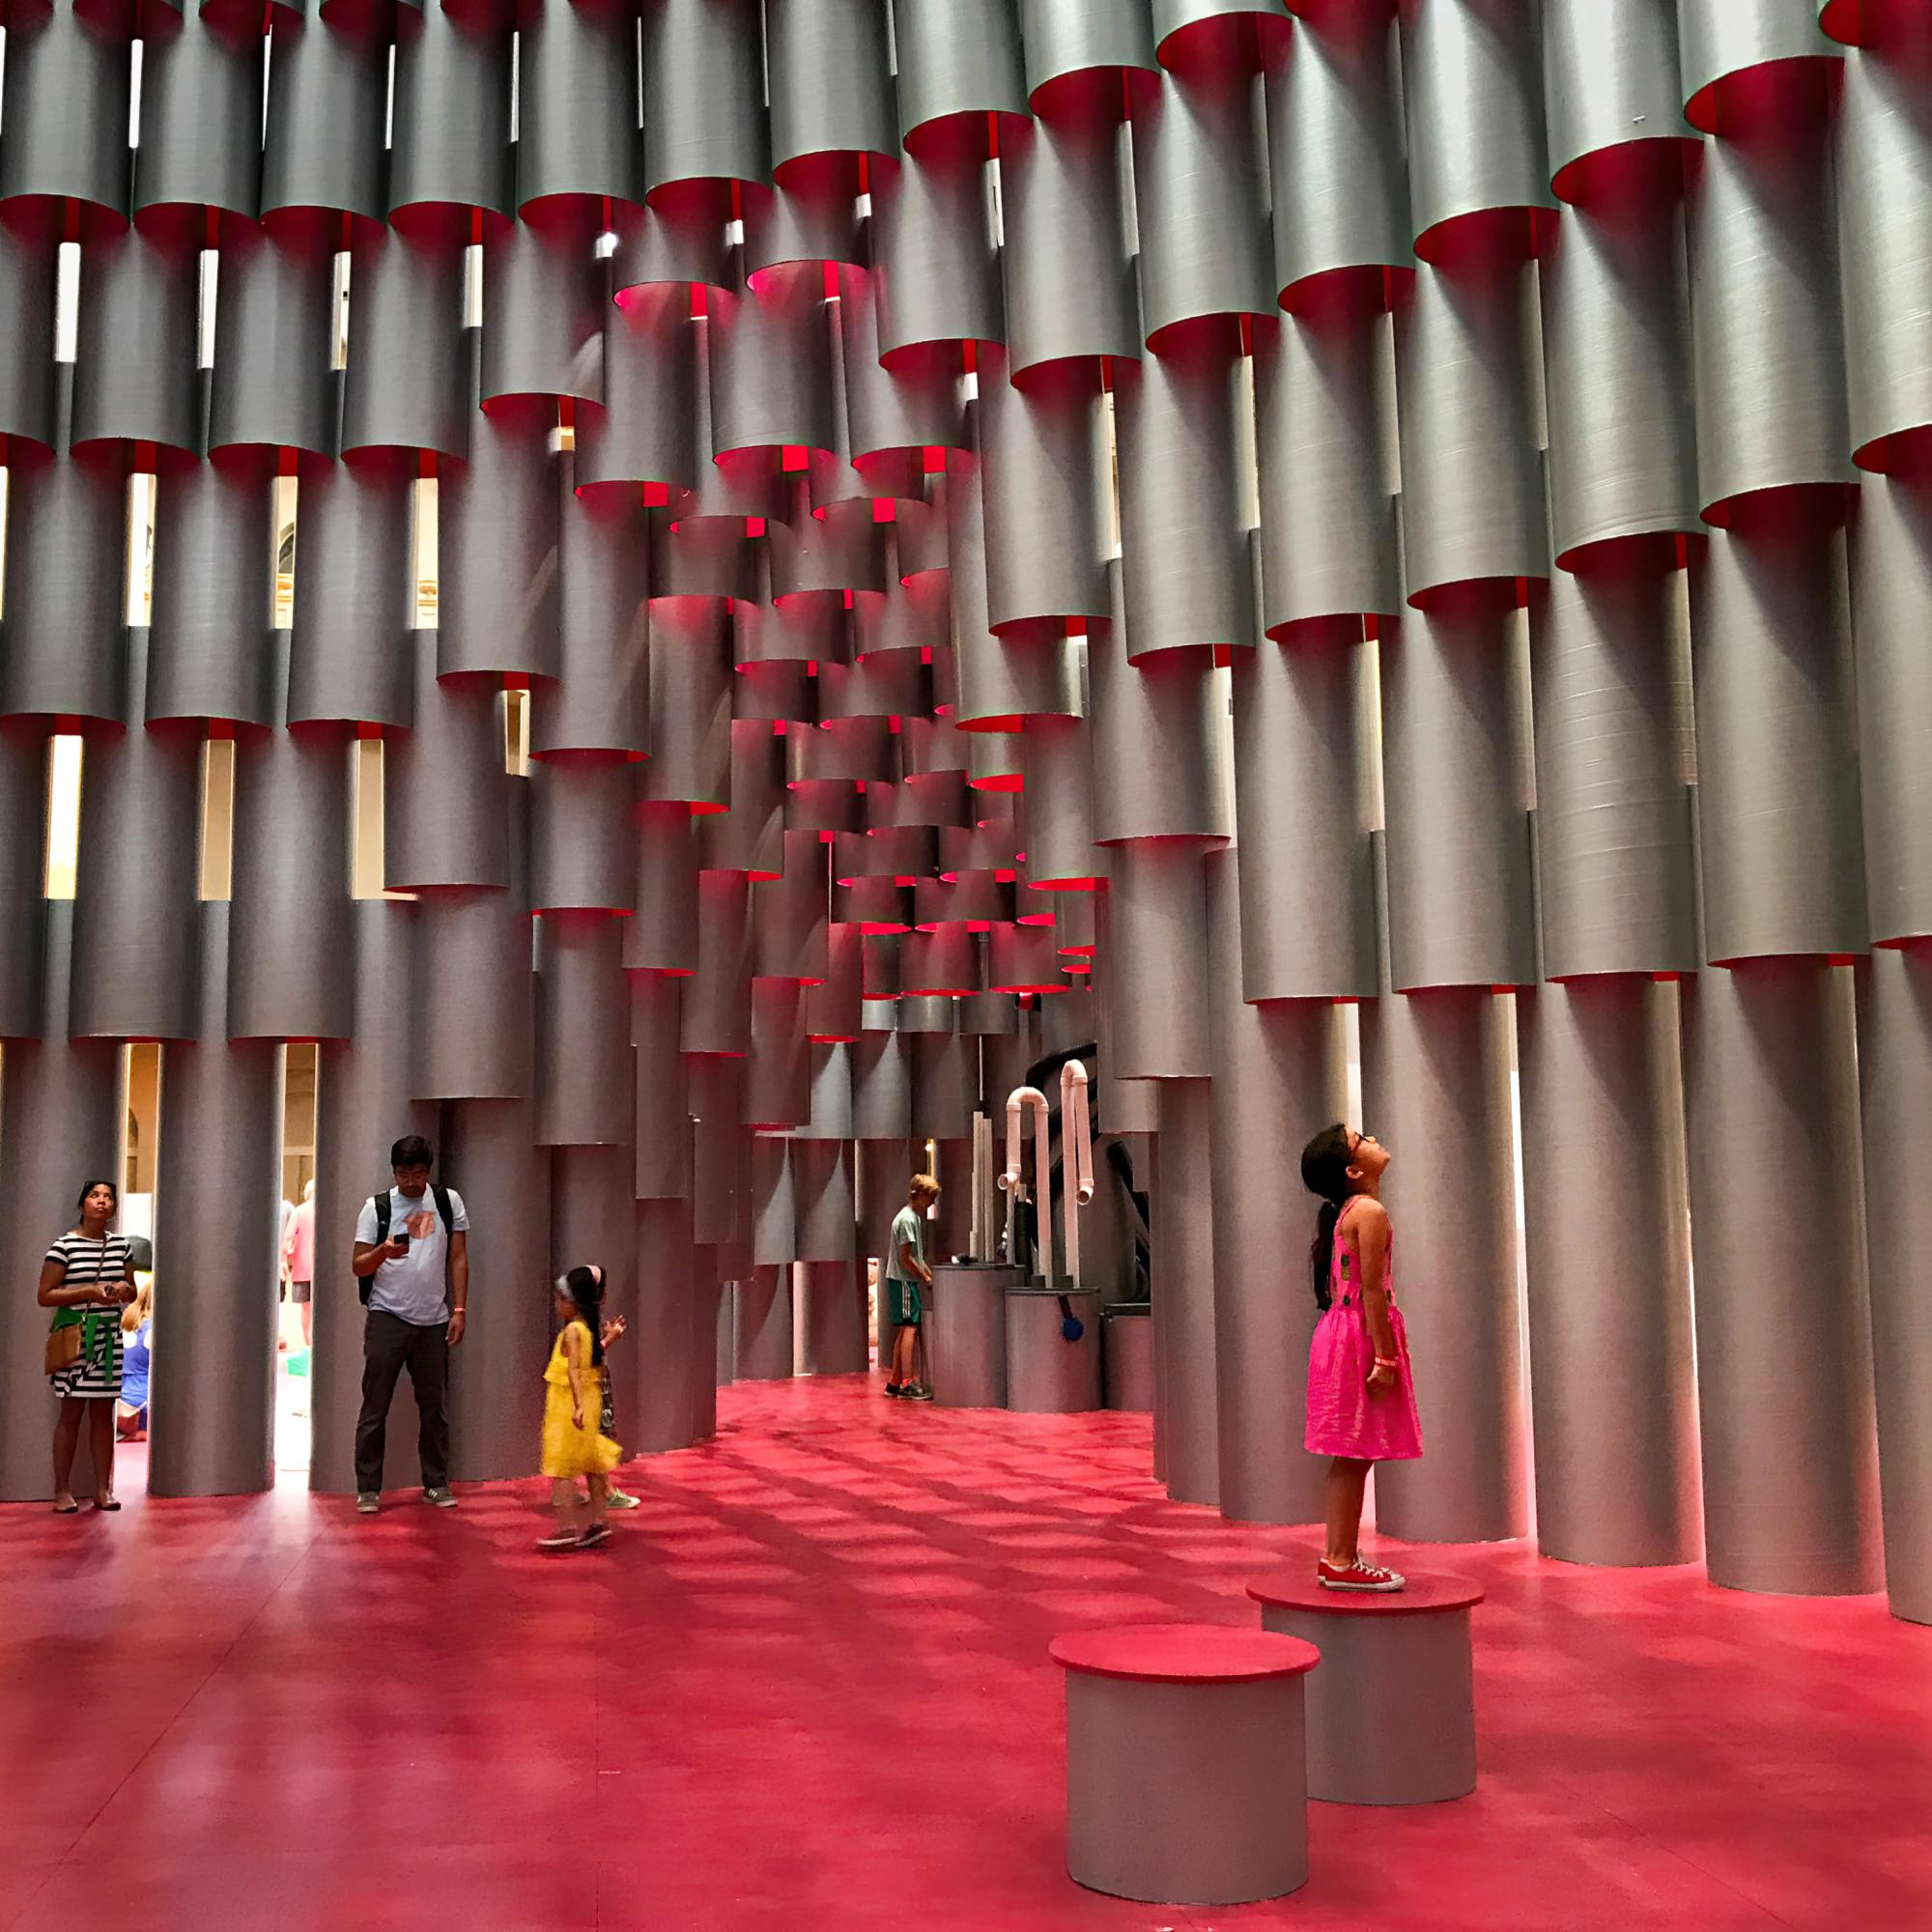 Viewing Art - Tubular installation at the National Building Museum in...